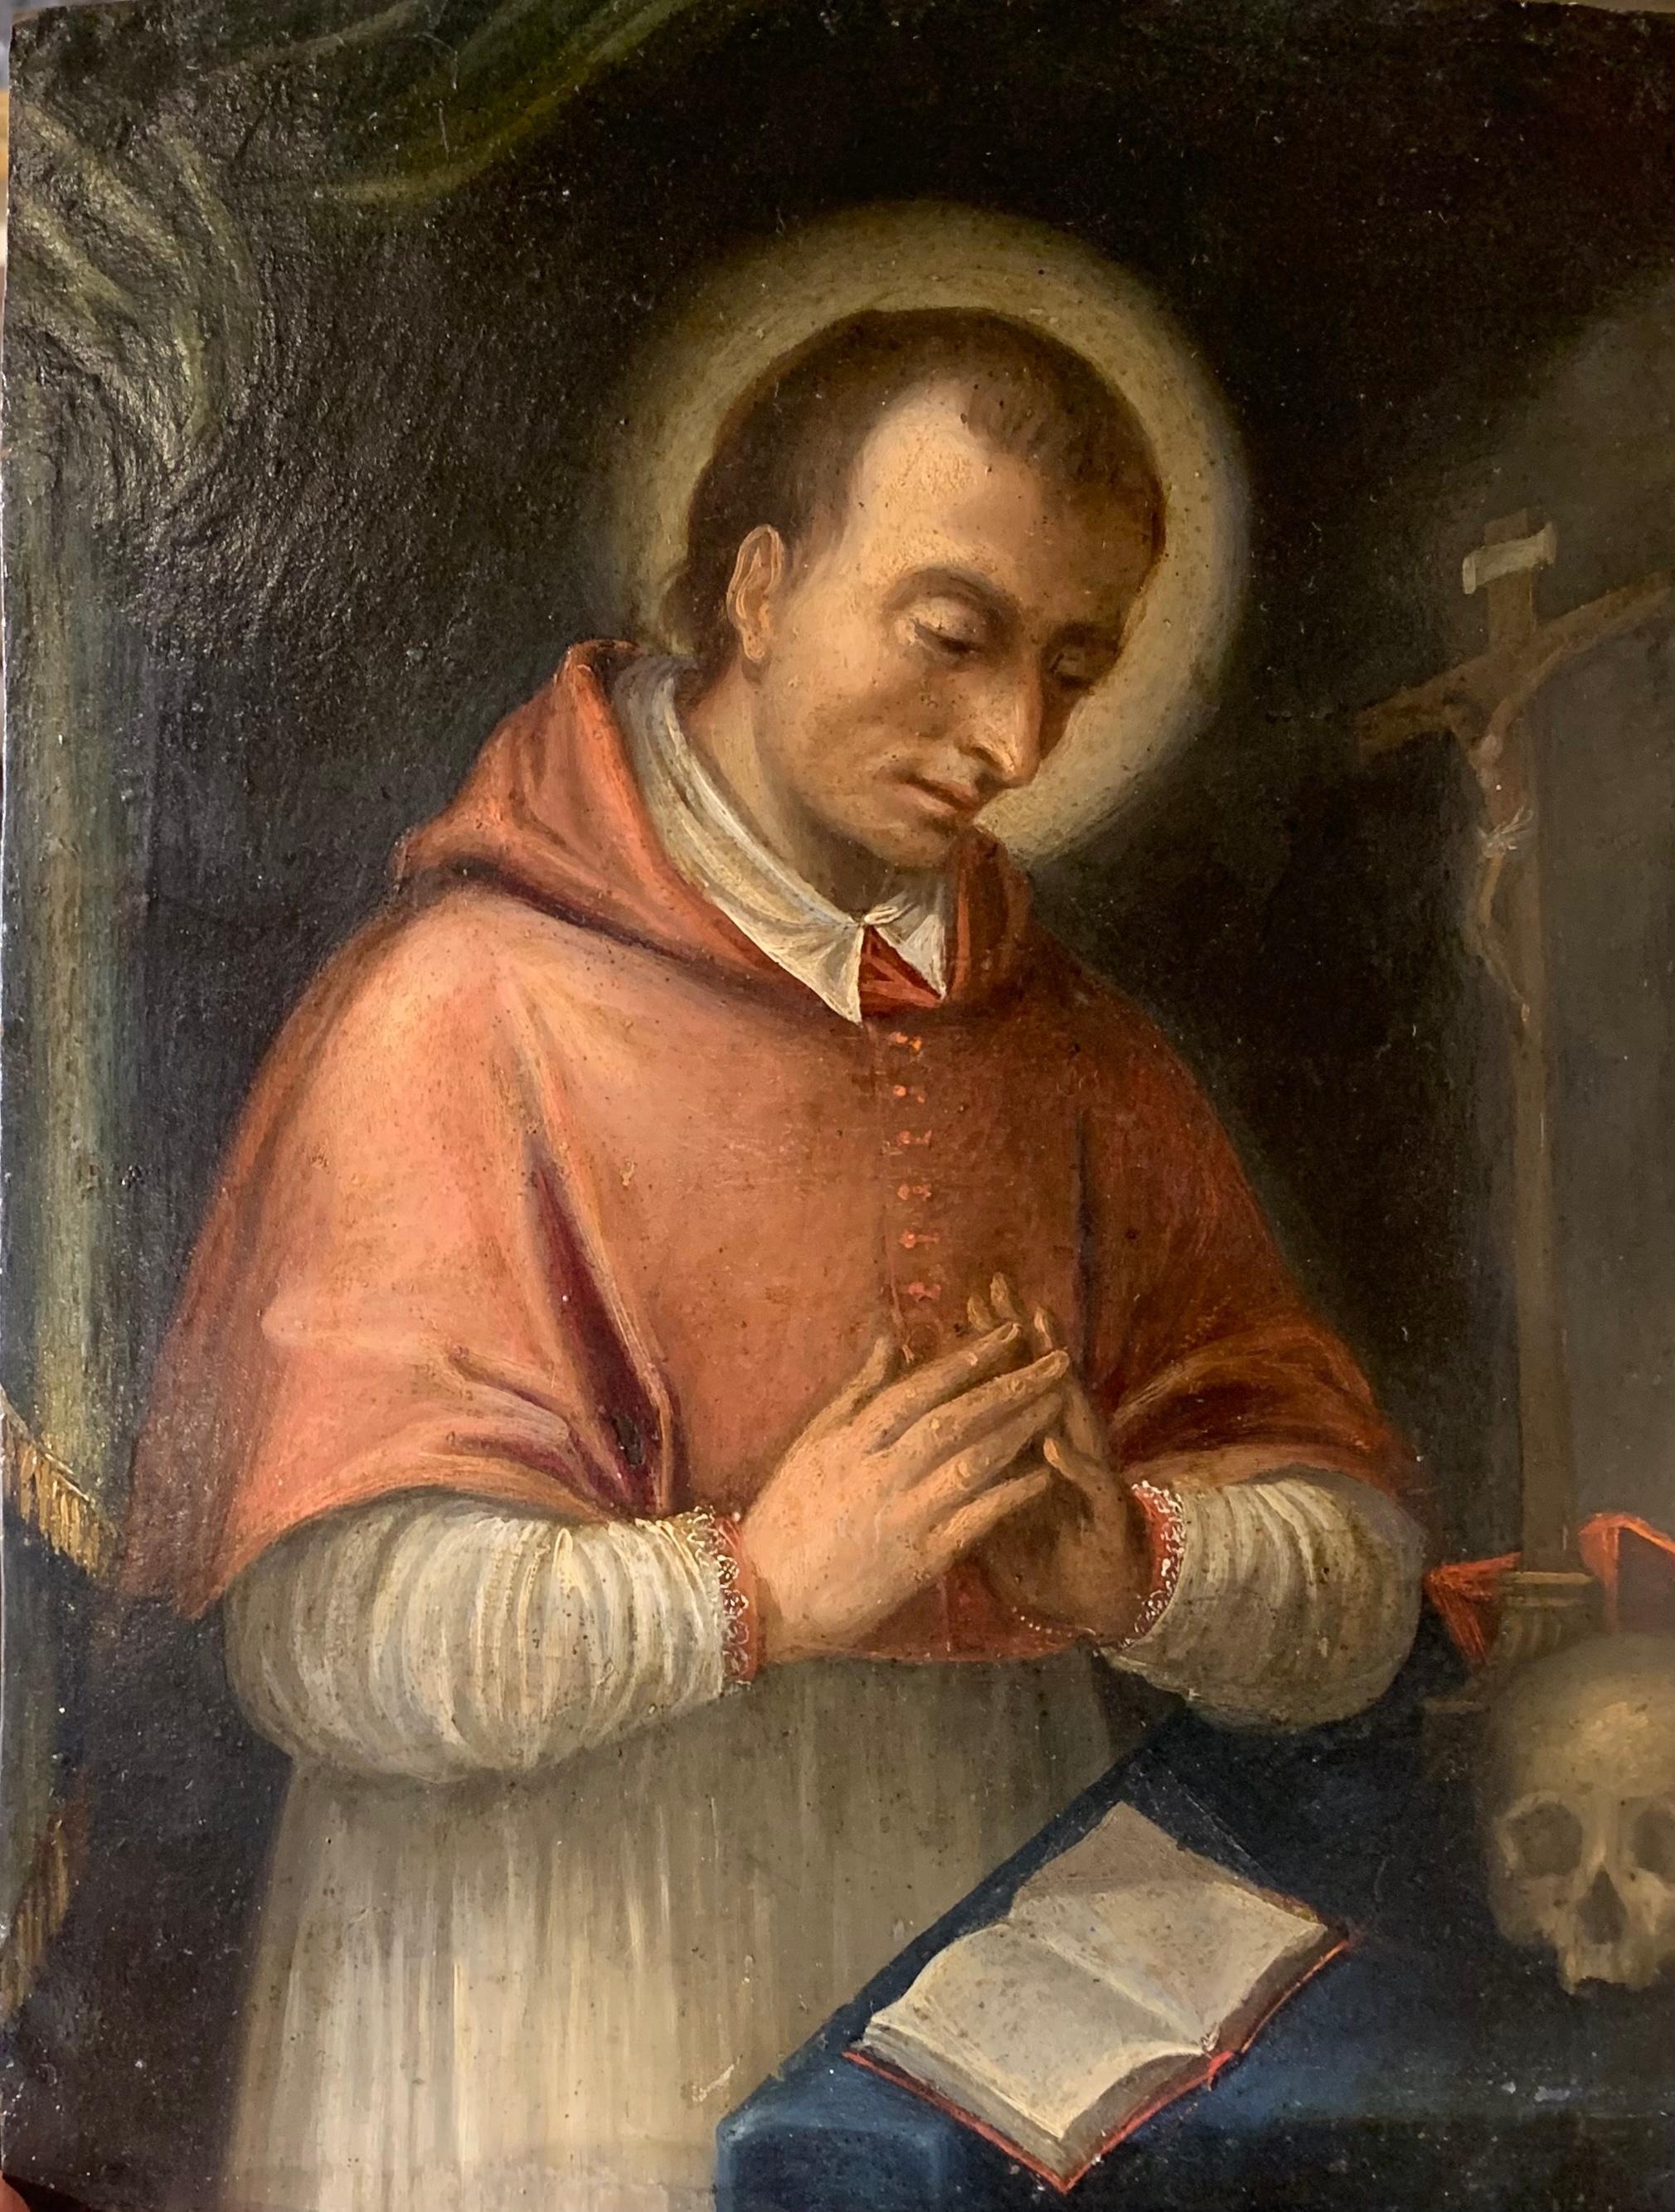 Unknown Portrait Painting - San Carlo Borromeo. Early 17th Century. Painting on Copper.